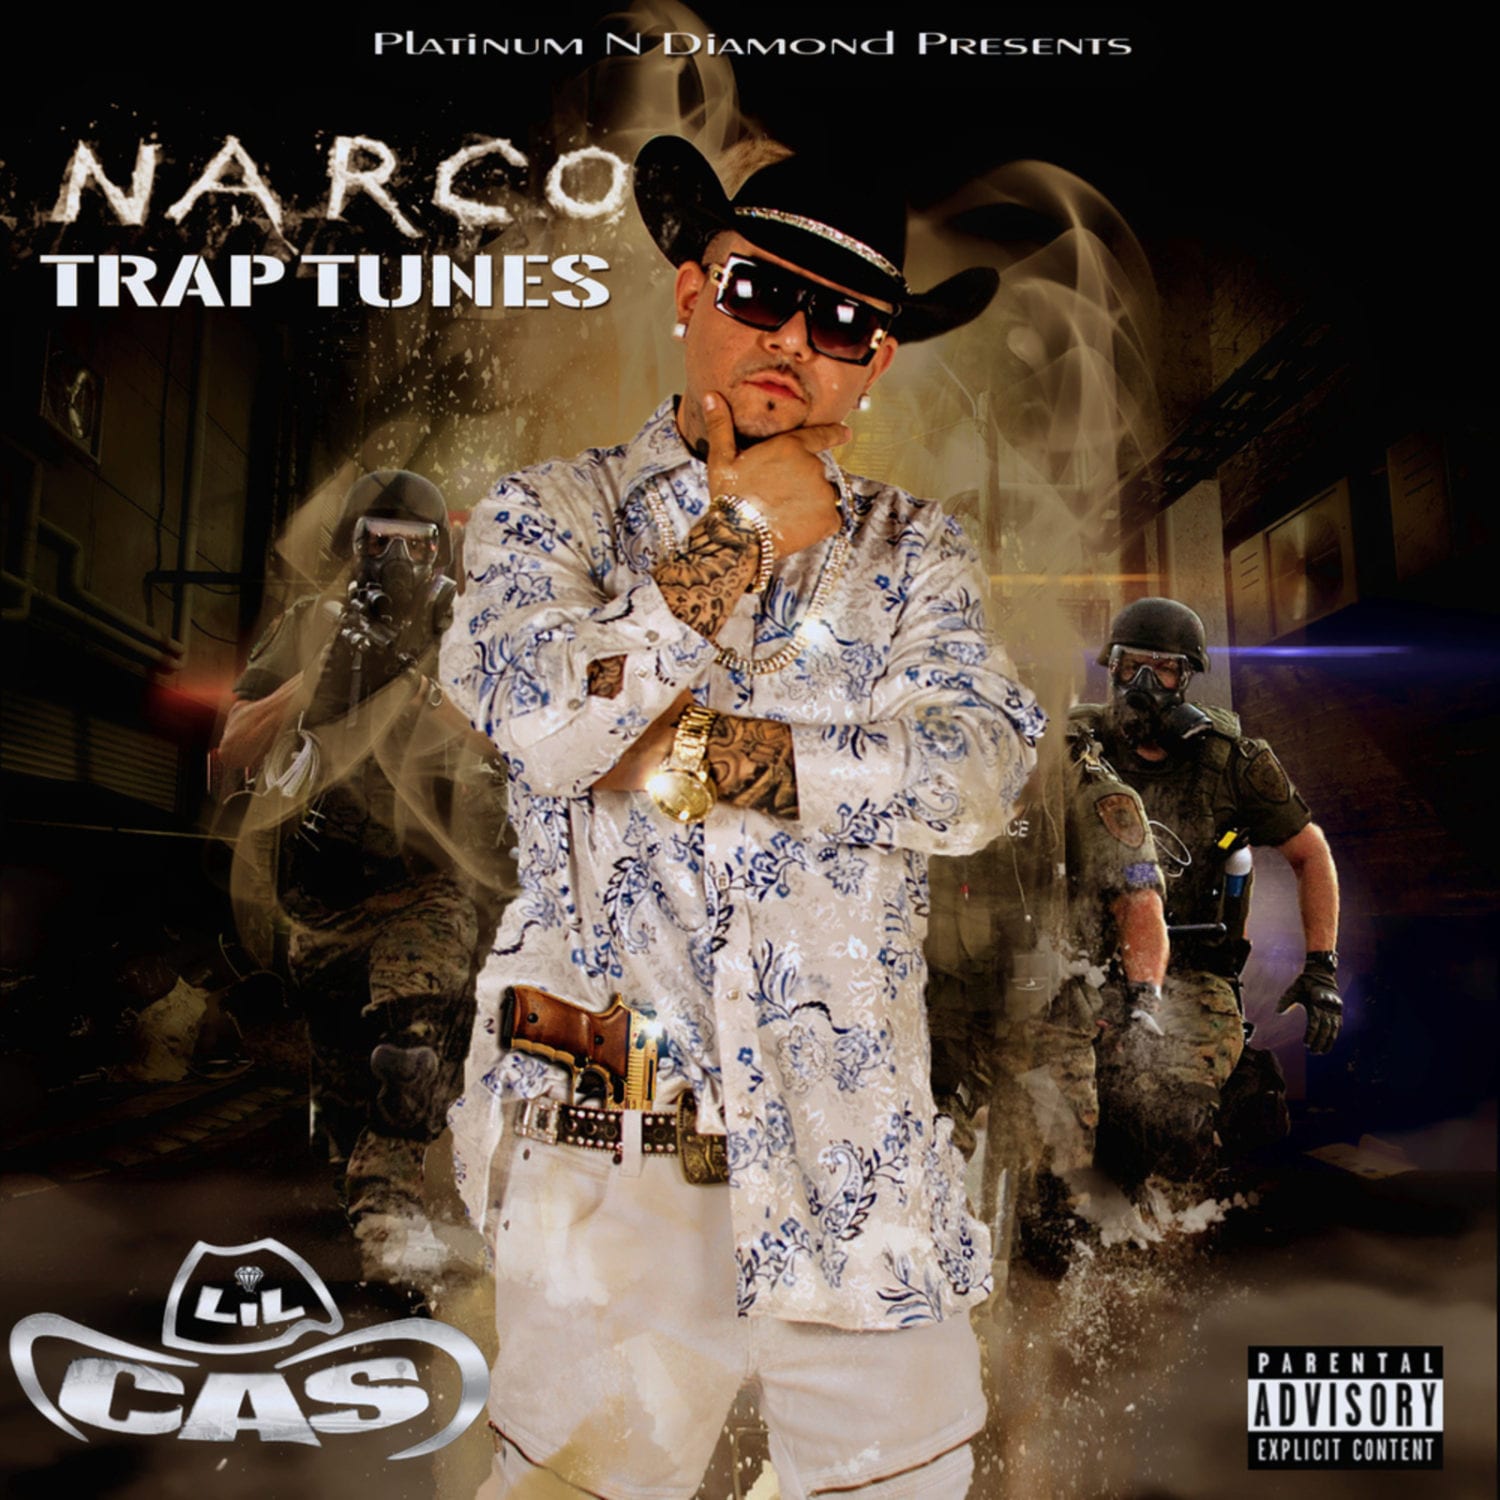 New Mixtape By Lil Cas - Narco Trap Tunes